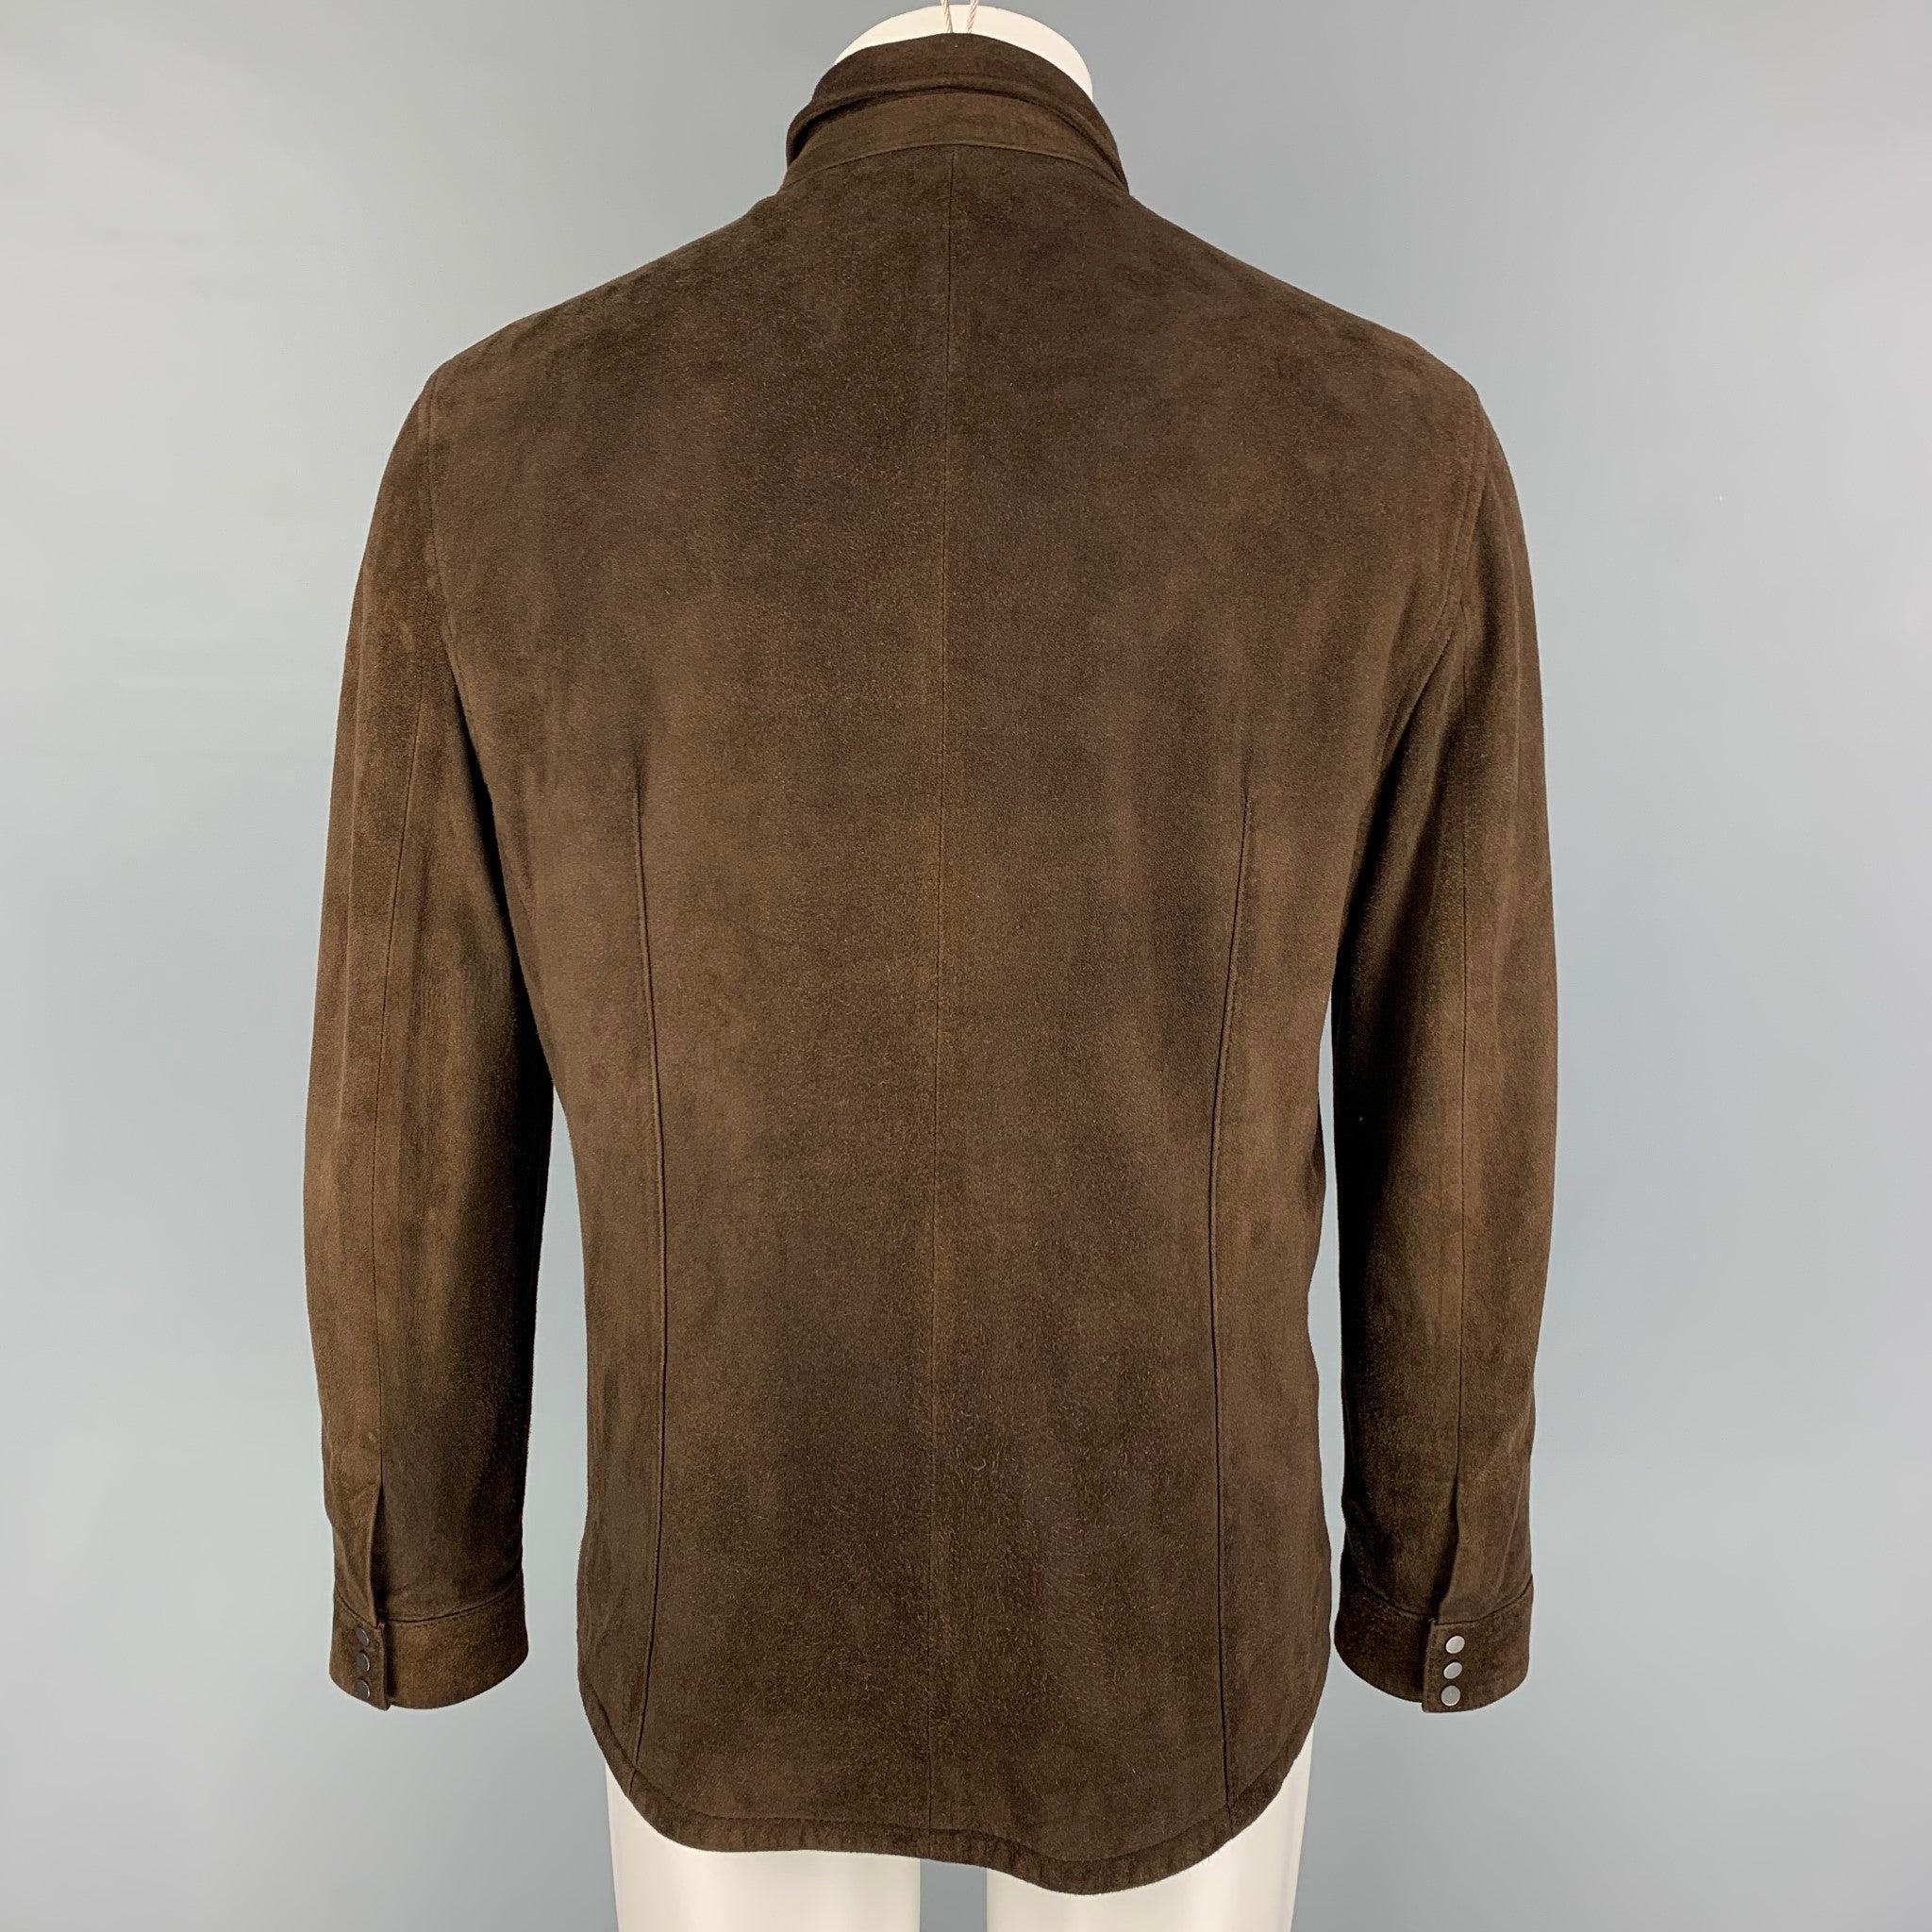 JOHN VARVATOS Size 40 Brown Suede Zip & Snaps Jacket In Good Condition For Sale In San Francisco, CA